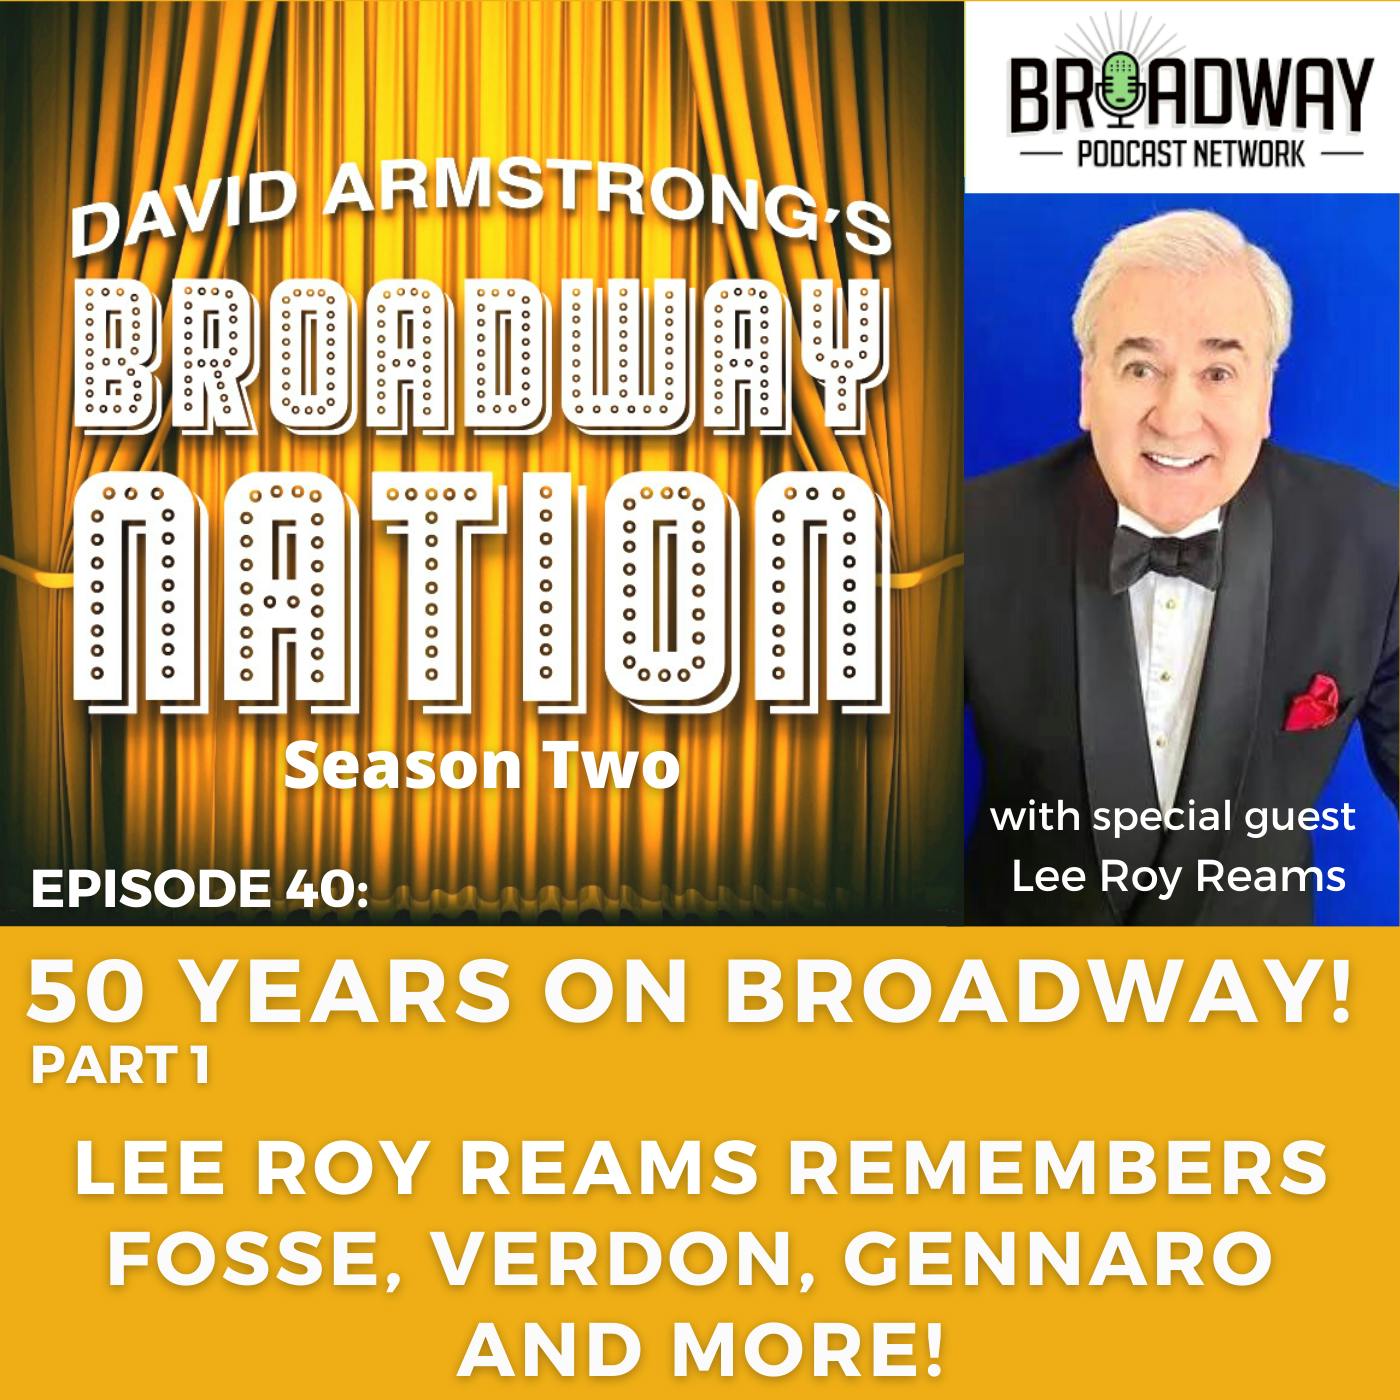 Episode 40: 50 YEARS ON BROADWAY! with special guest LEE ROY REAMS Image